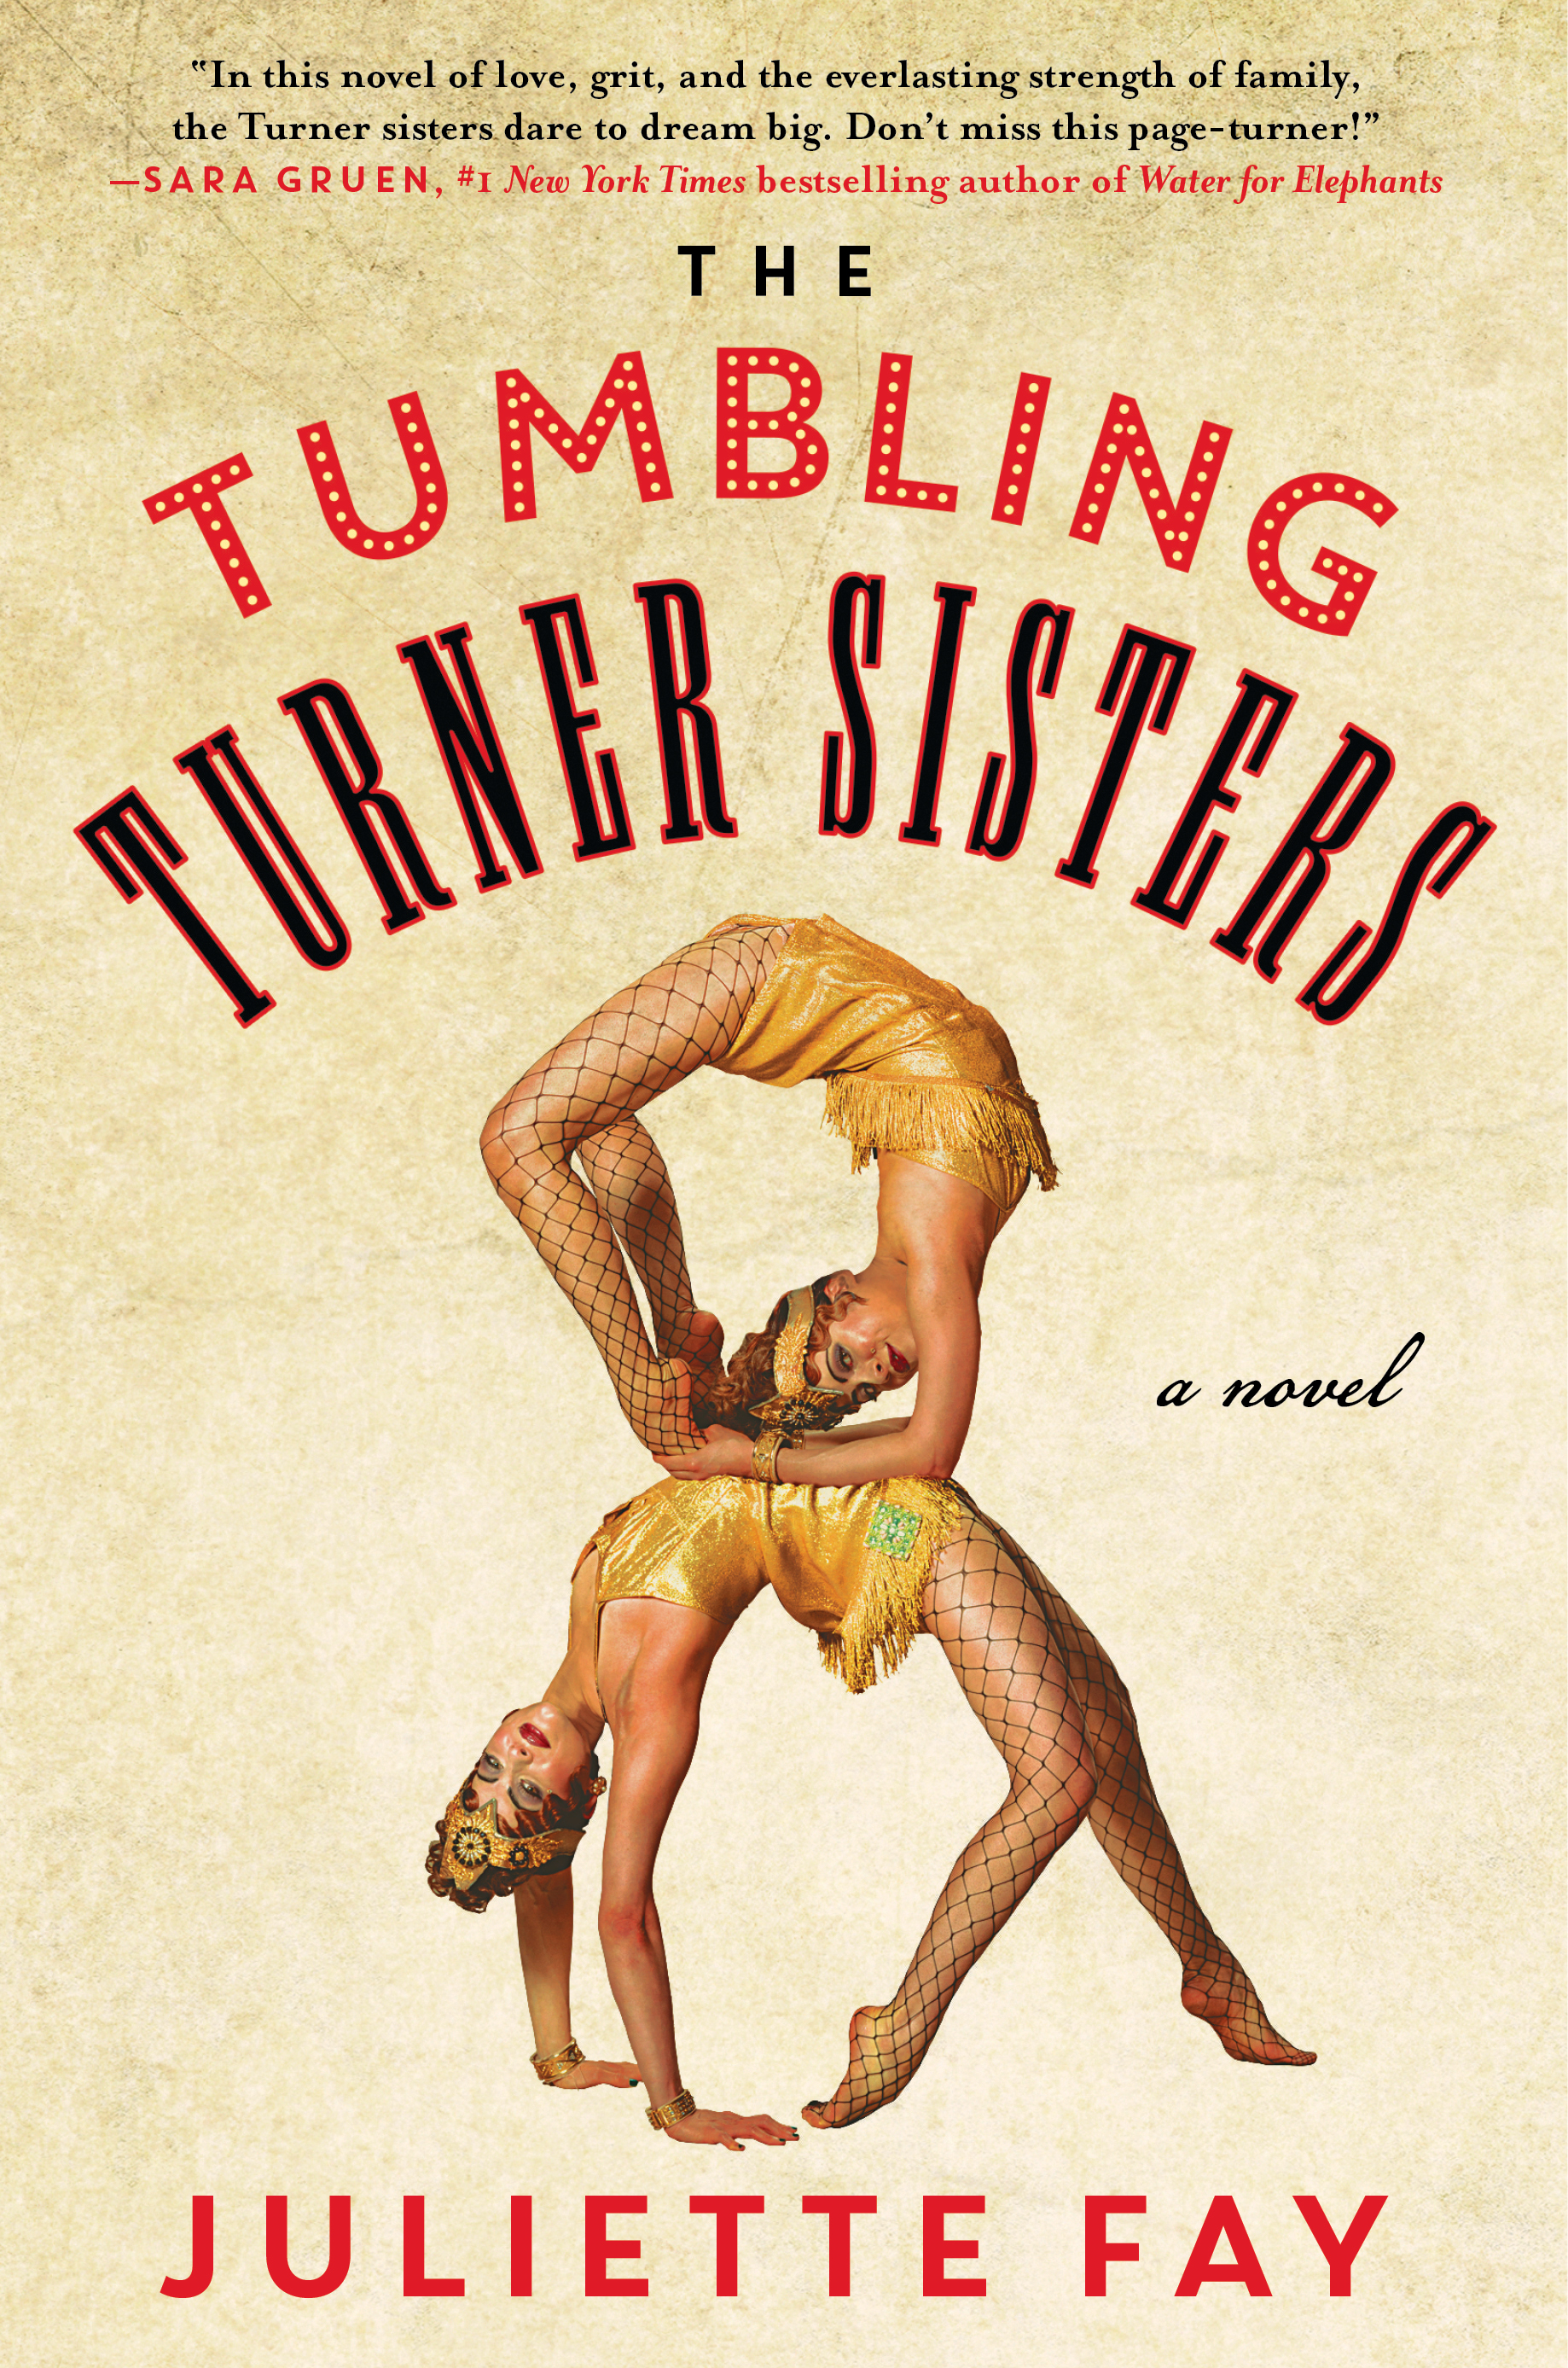 Book cover of The Tumbling Turner Sisters by Juliette Fay